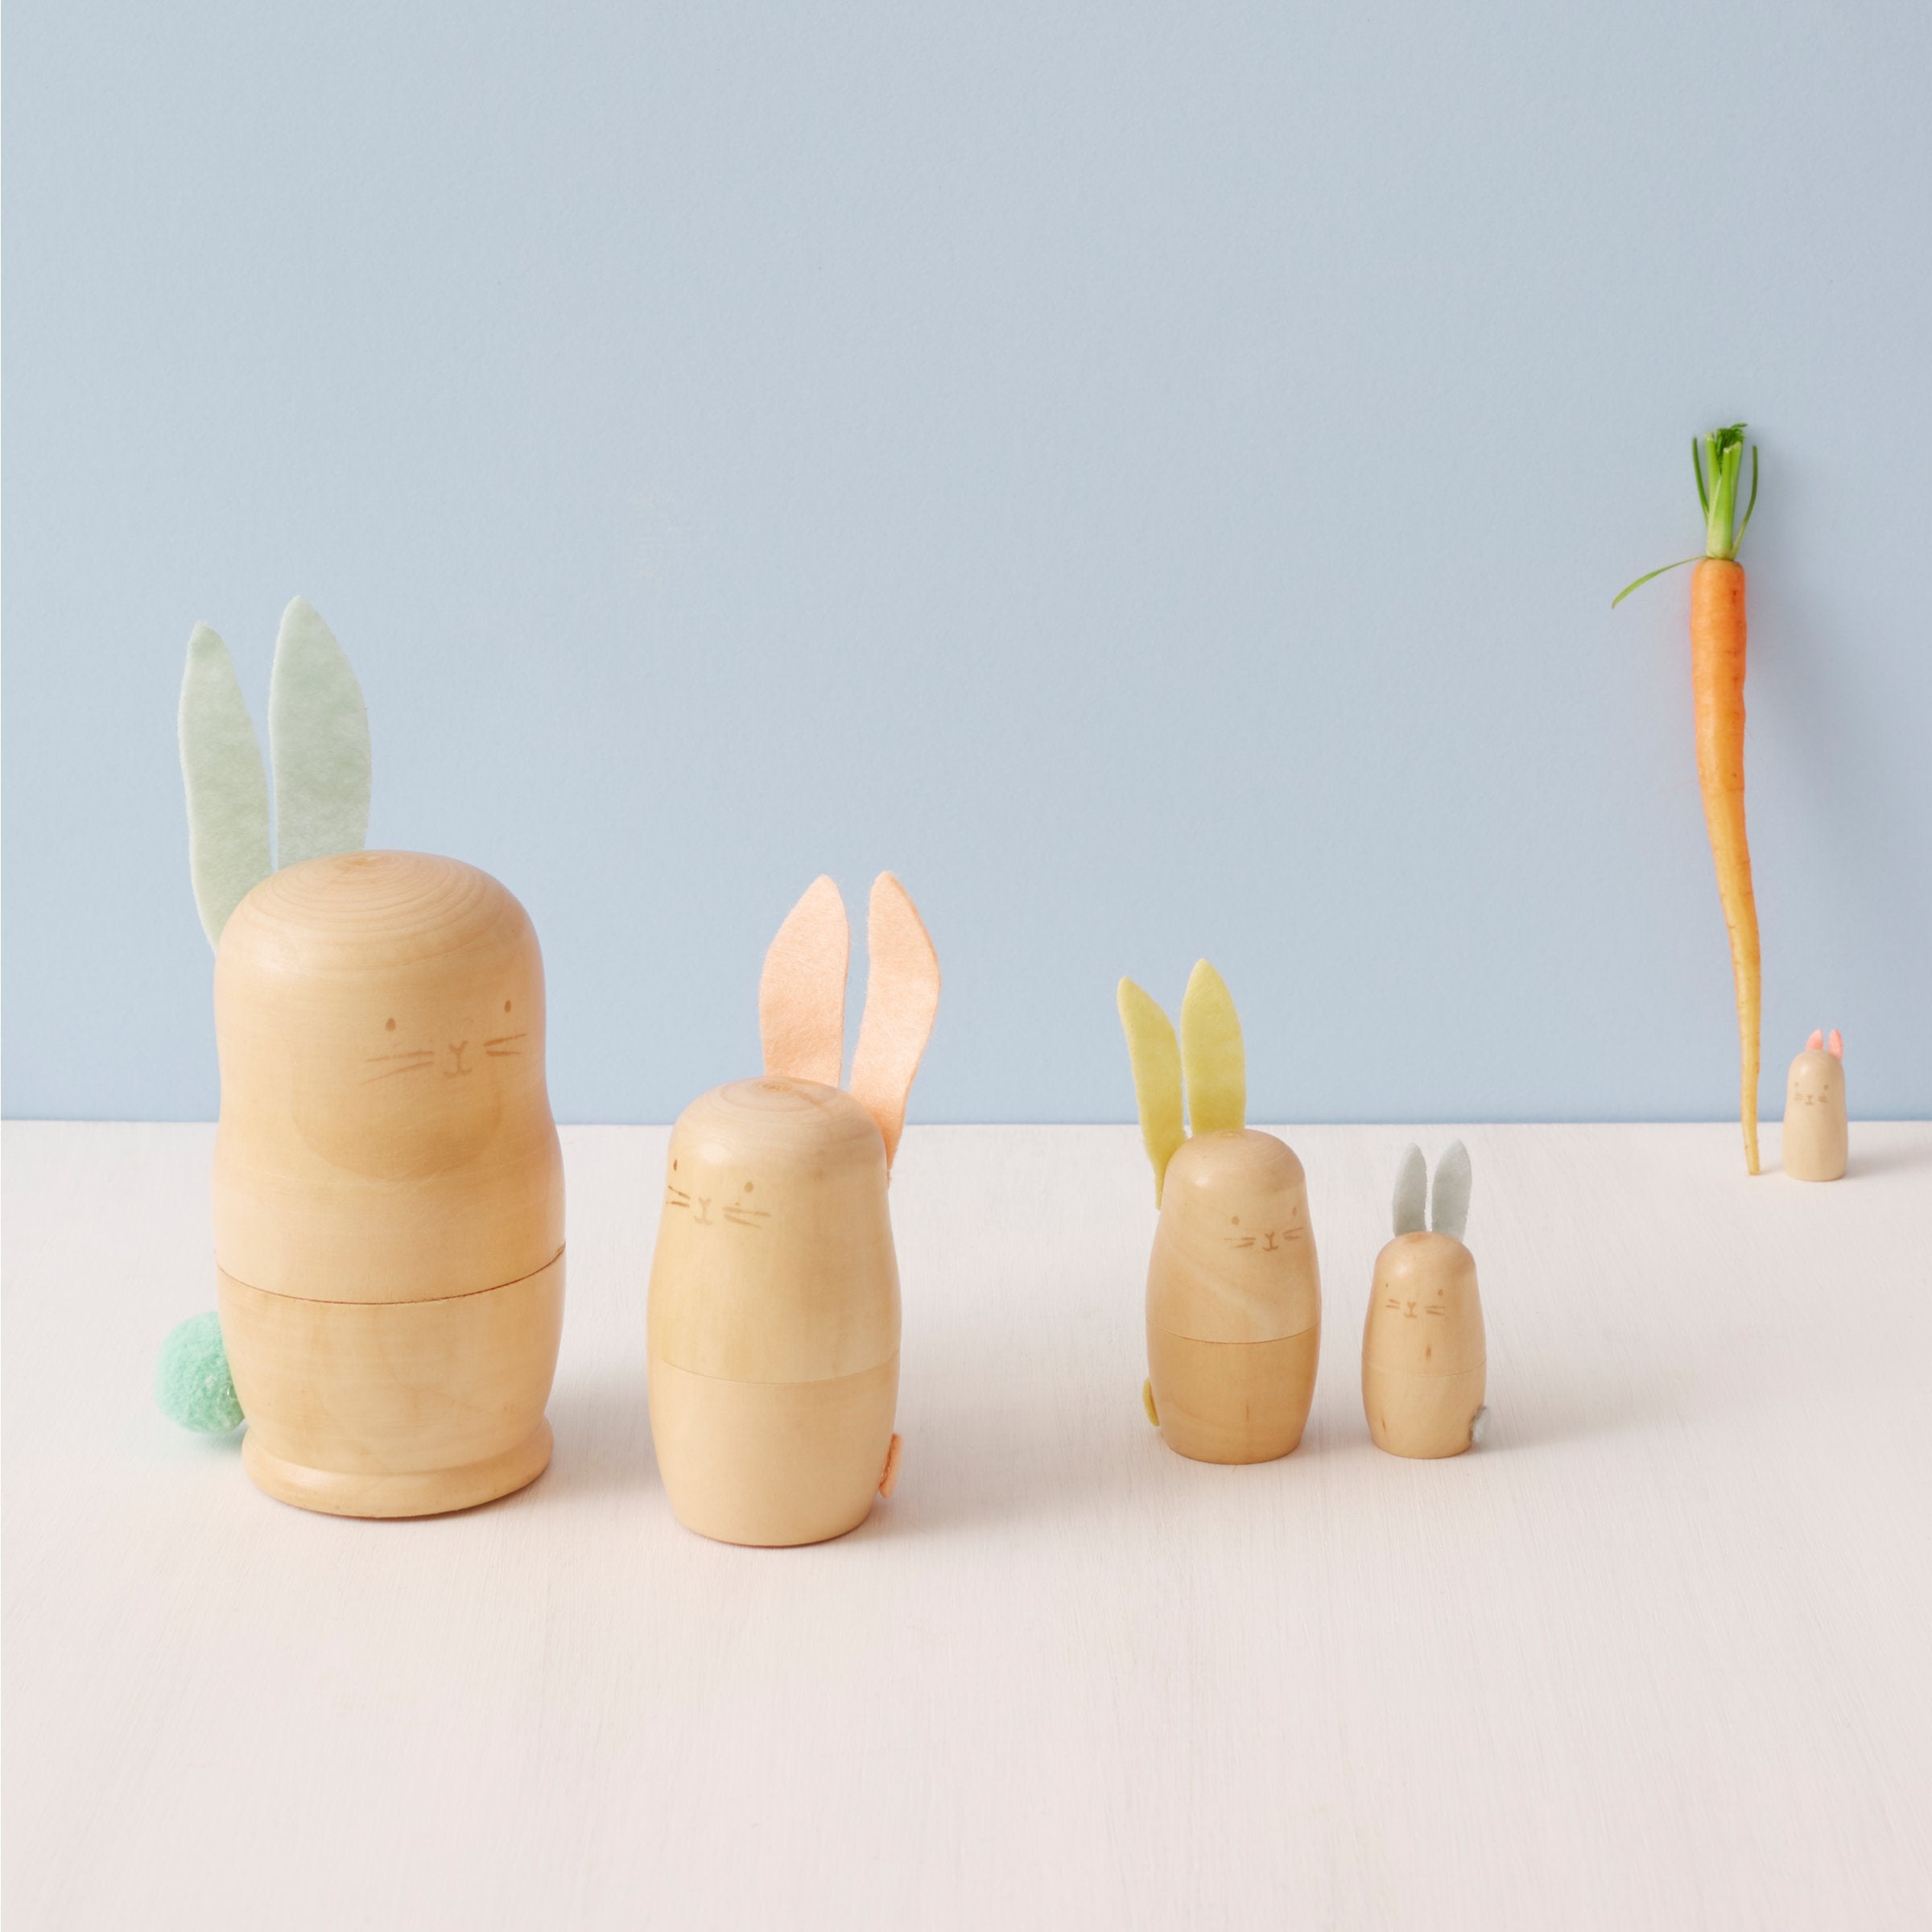 These stacking bunnies are crafted from wood, with gold features, and felt ears and tails.